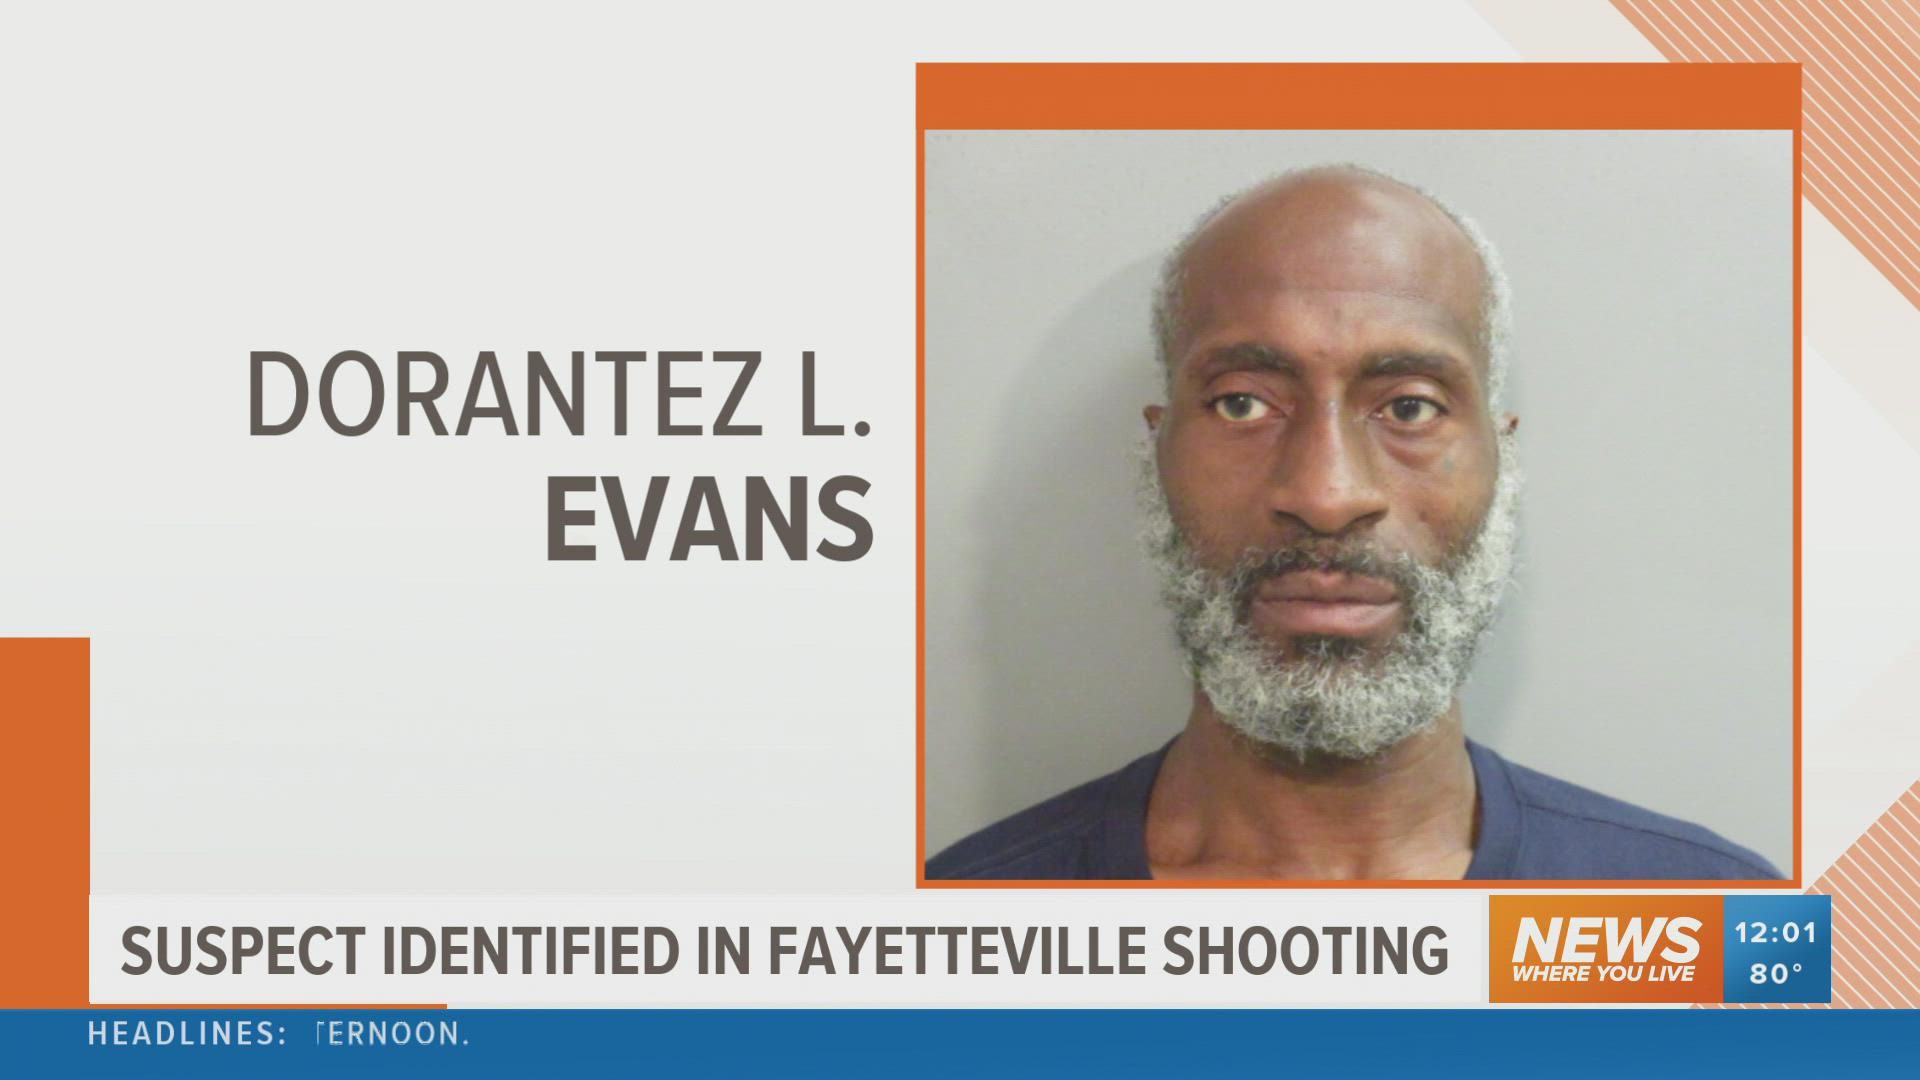 Dorantez L. Evans has been arrested in connection to the shooting.